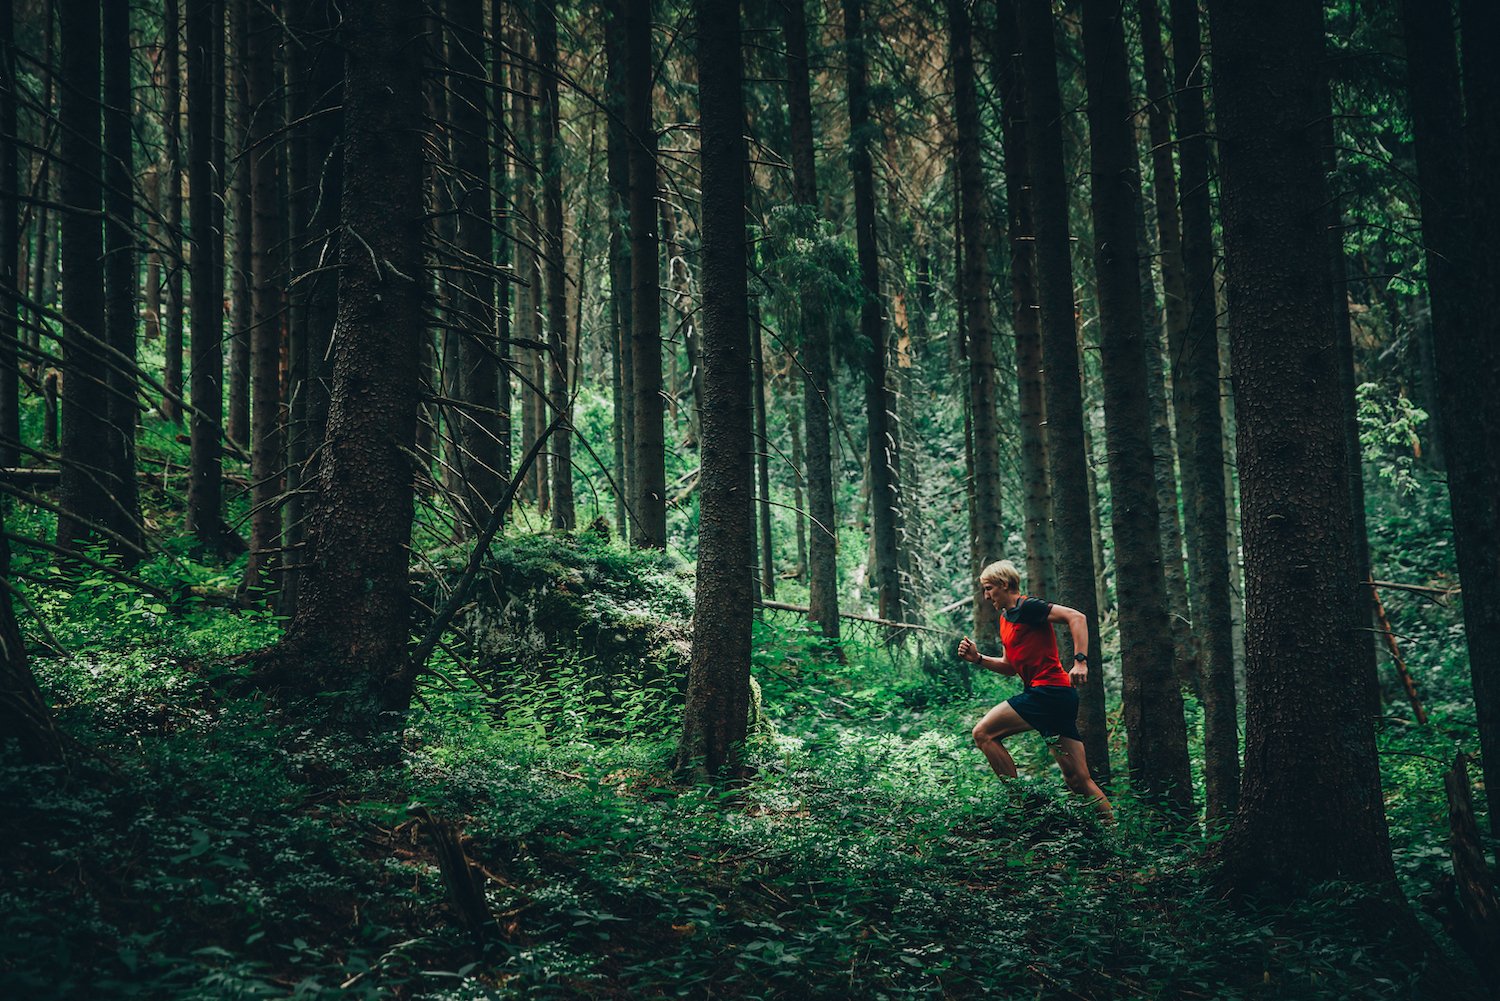 A person in a red shirt jogging through the forrest